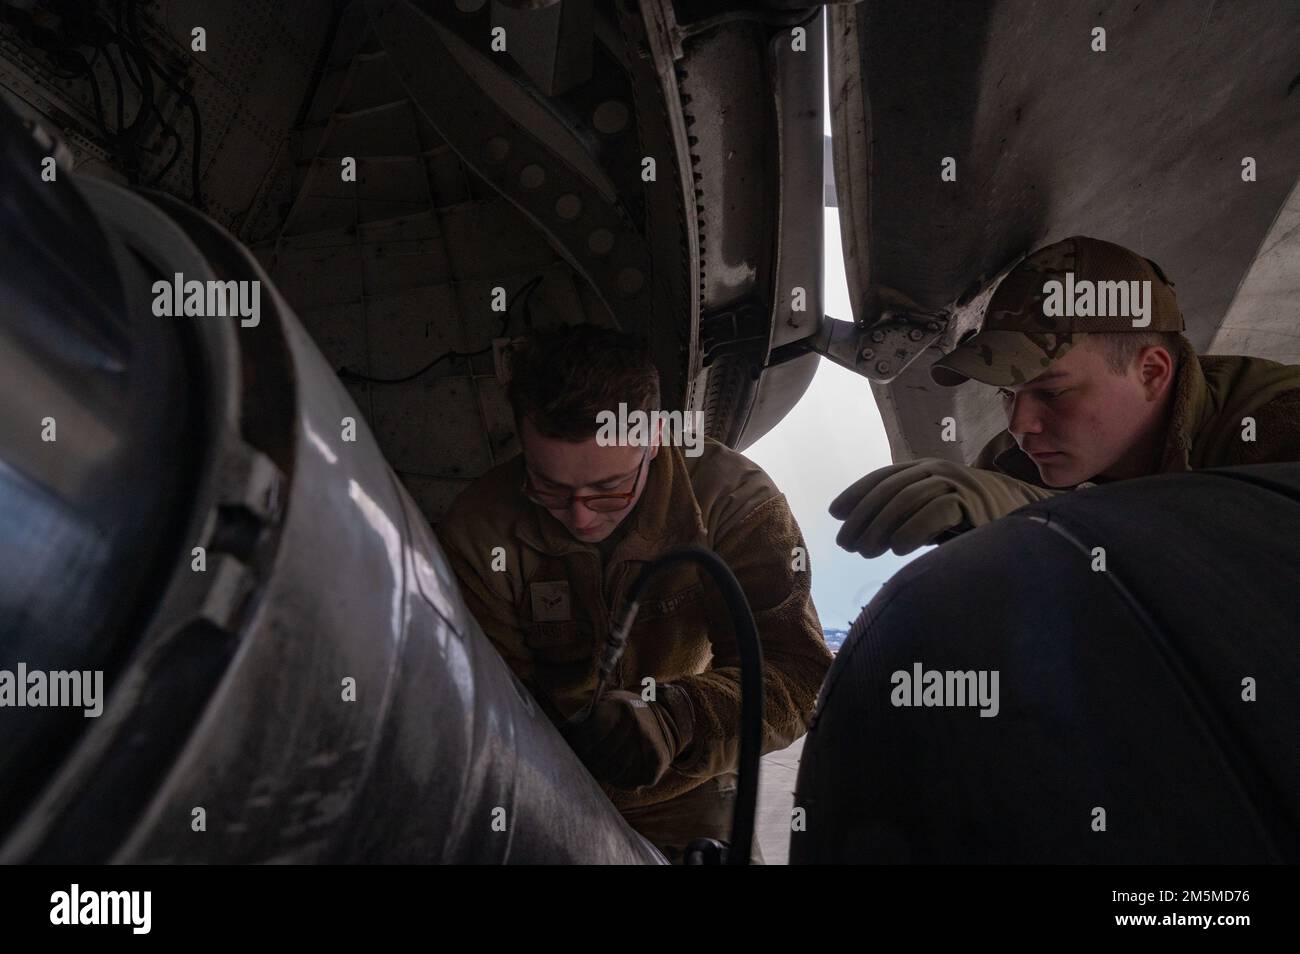 U.S. Air Force Airman 1st Class Brigham Cheshire, left, and Senior Airman Jake Morley, both crew chiefs assigned to the 62nd Maintenance Squadron, replace a brake on a C-17 Globemaster III during Exercise Rainier War 22A at Joint Base Elmendorf-Richardson, Alaska, March 25, 2022. The exercise is designed to demonstrate the wing’s ability to operate and survive while defeating challenges to the U.S. military advantage in all operating domains – air, land, sea and cyberspace. Stock Photo